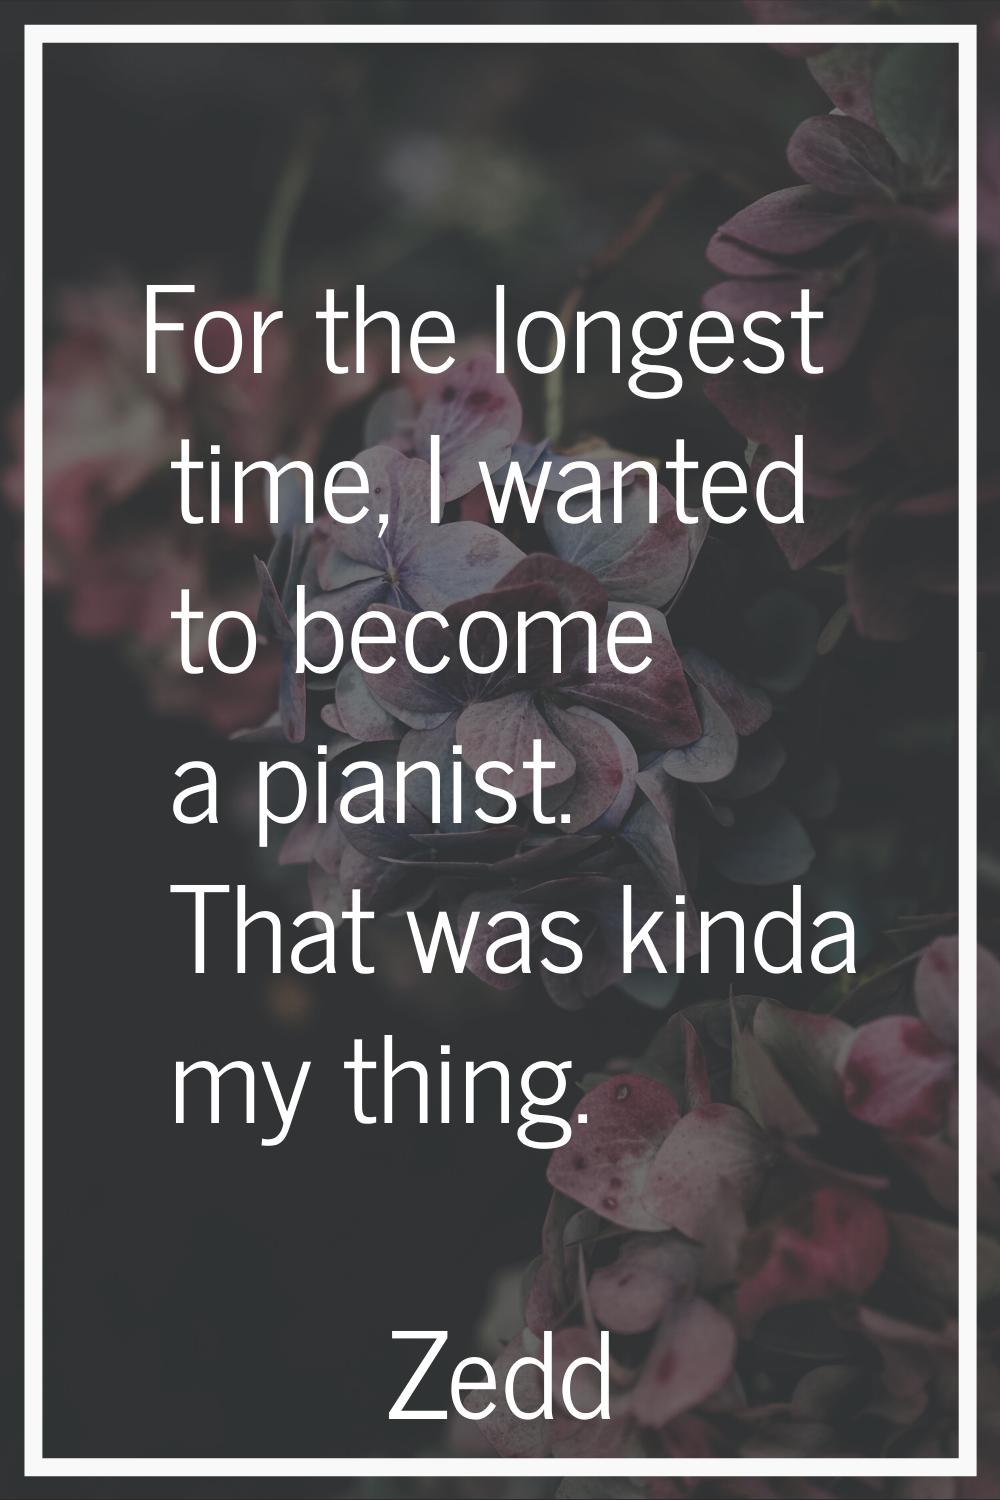 For the longest time, I wanted to become a pianist. That was kinda my thing.